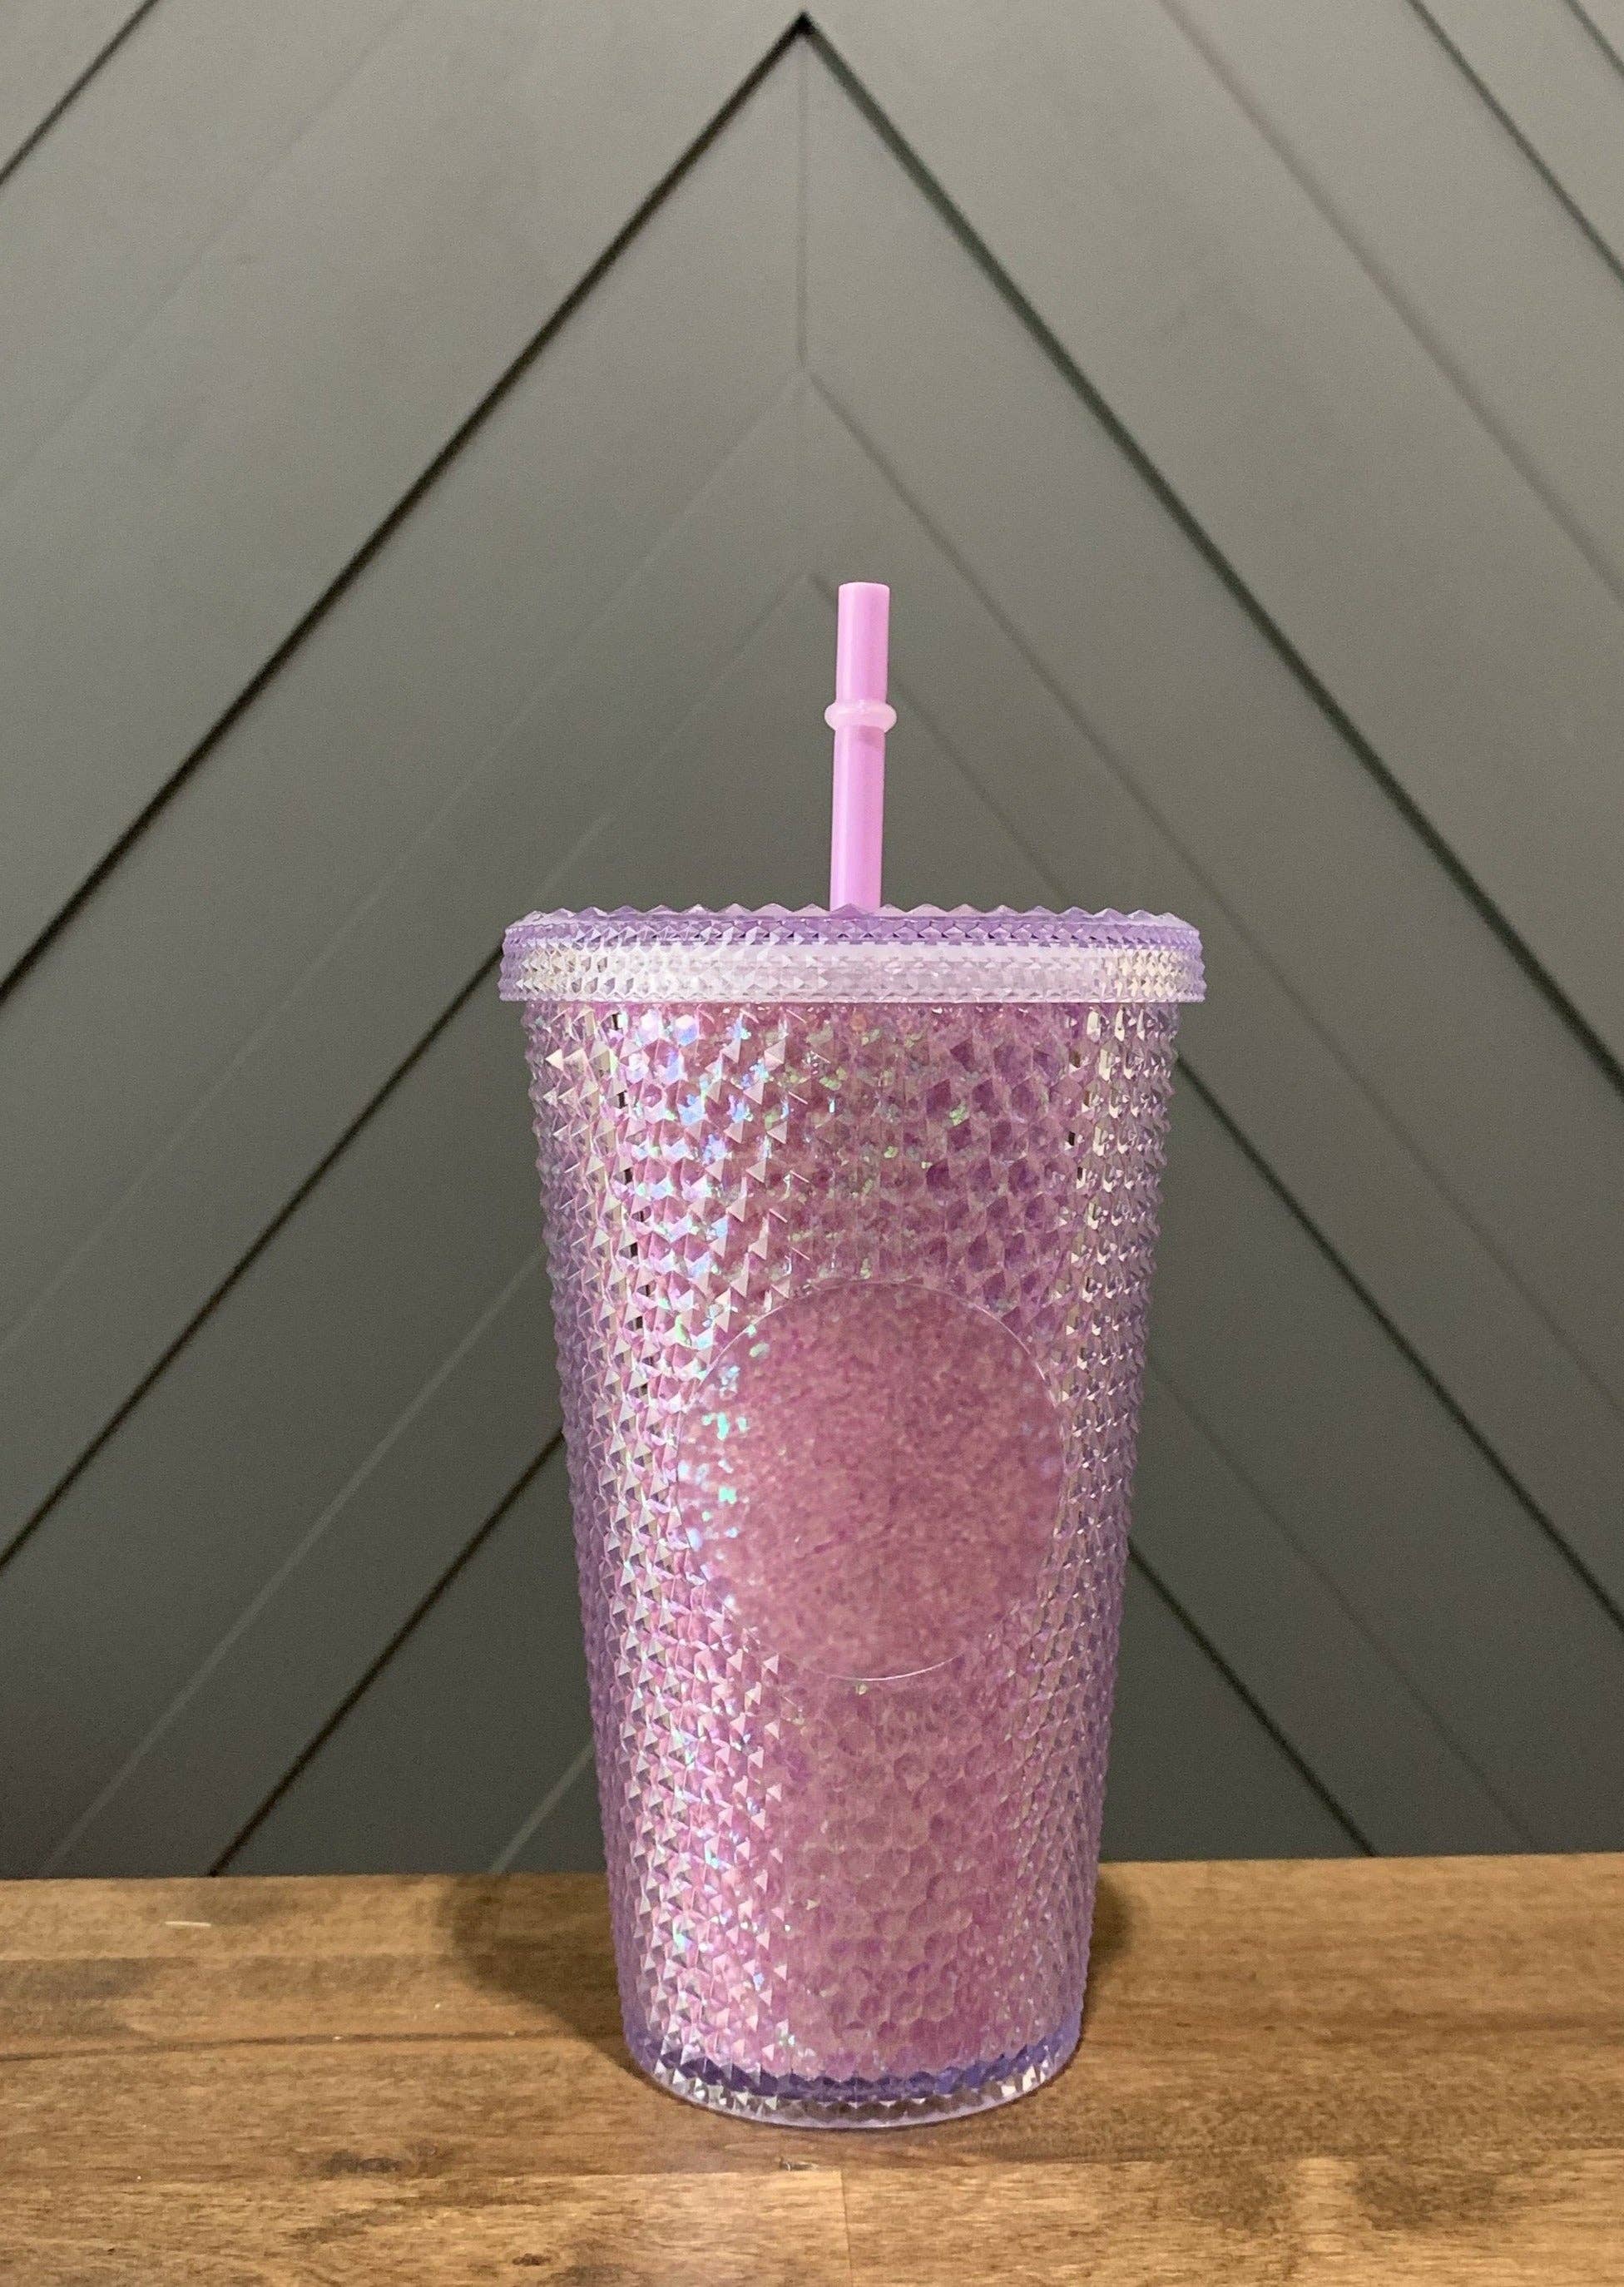 22 oz bedazzled tumbler, double walled tumbler, Rhinestone cups, Blinged  tumblers, Purple, Pearls, Aesthetic, Design Luxury Tumblers, Matte